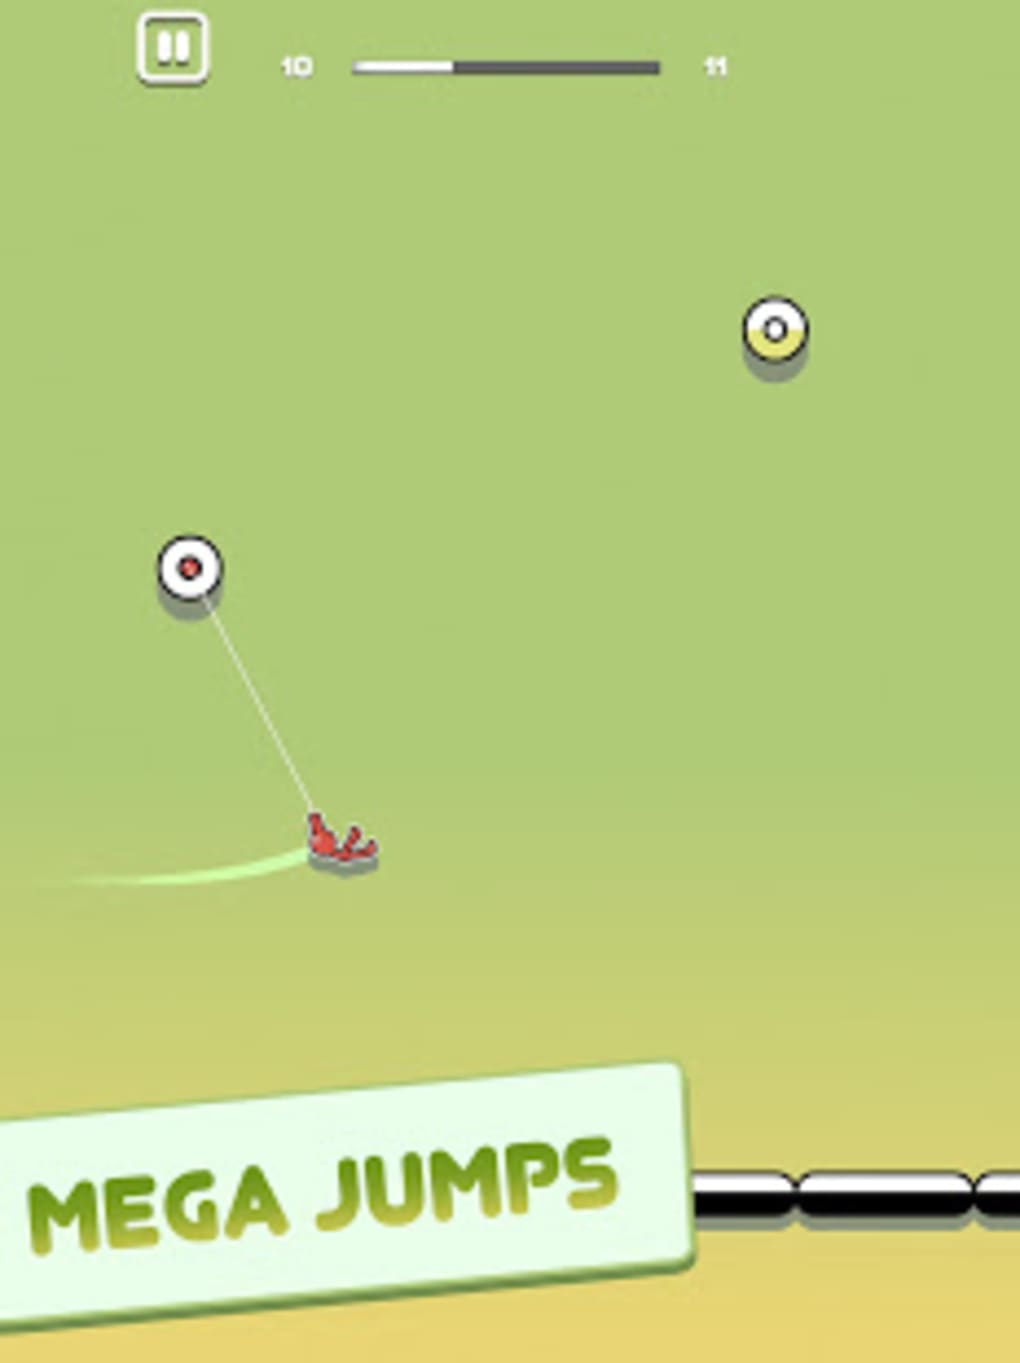 Download Stickman Hook (MOD) APK for Android